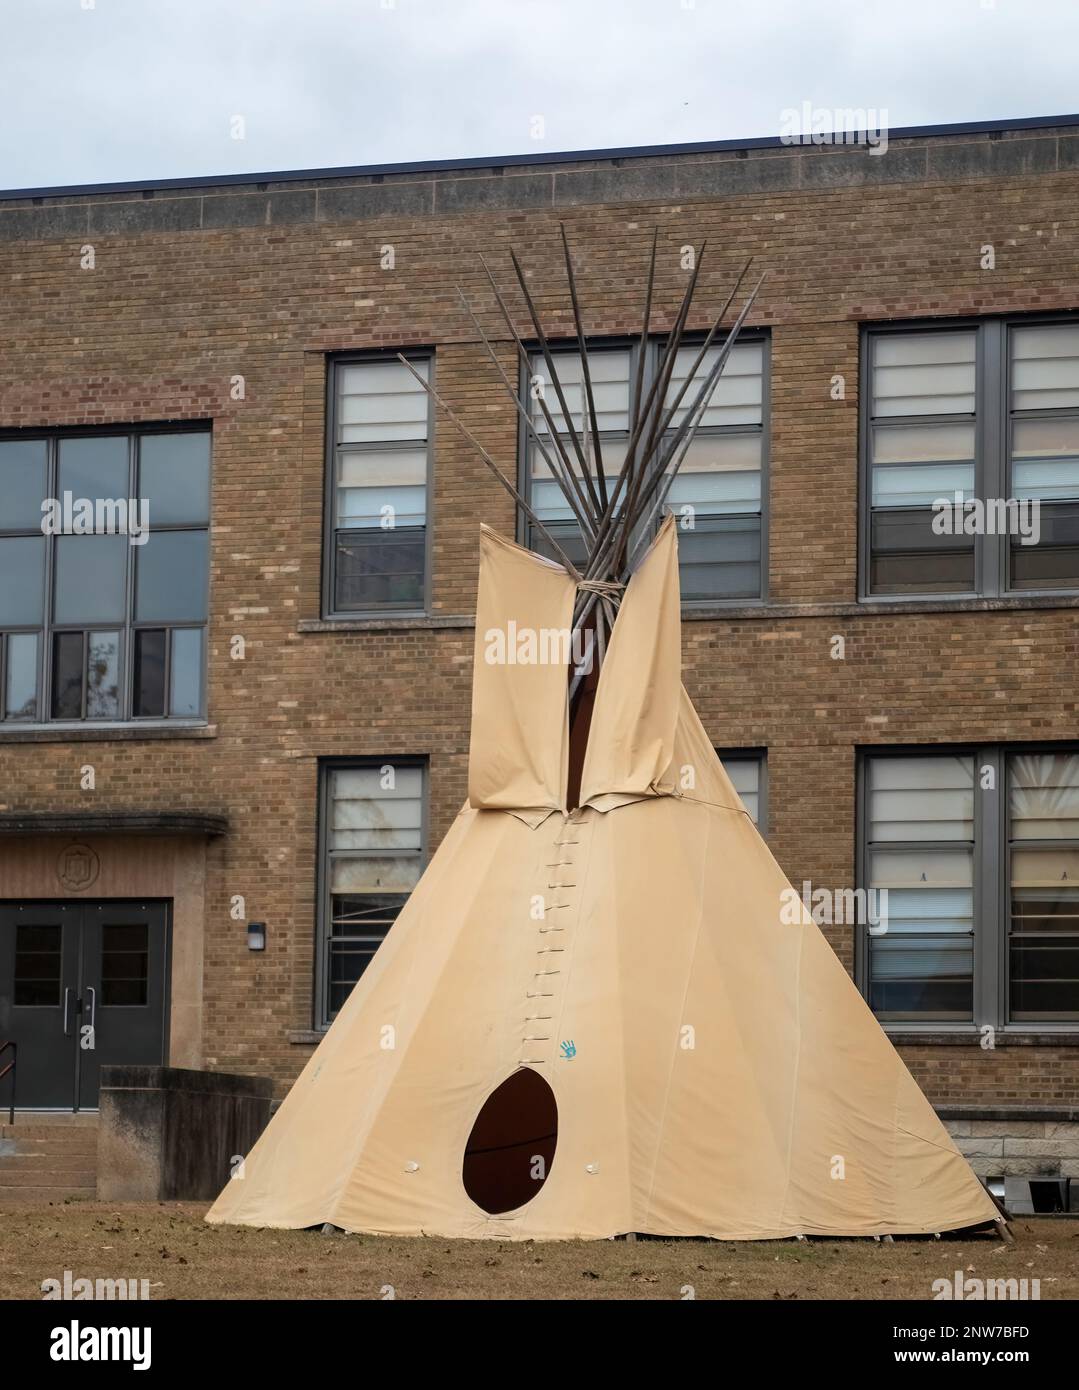 Native American teepee setup in front of a school in Winona, Minnesota USA. Stock Photo